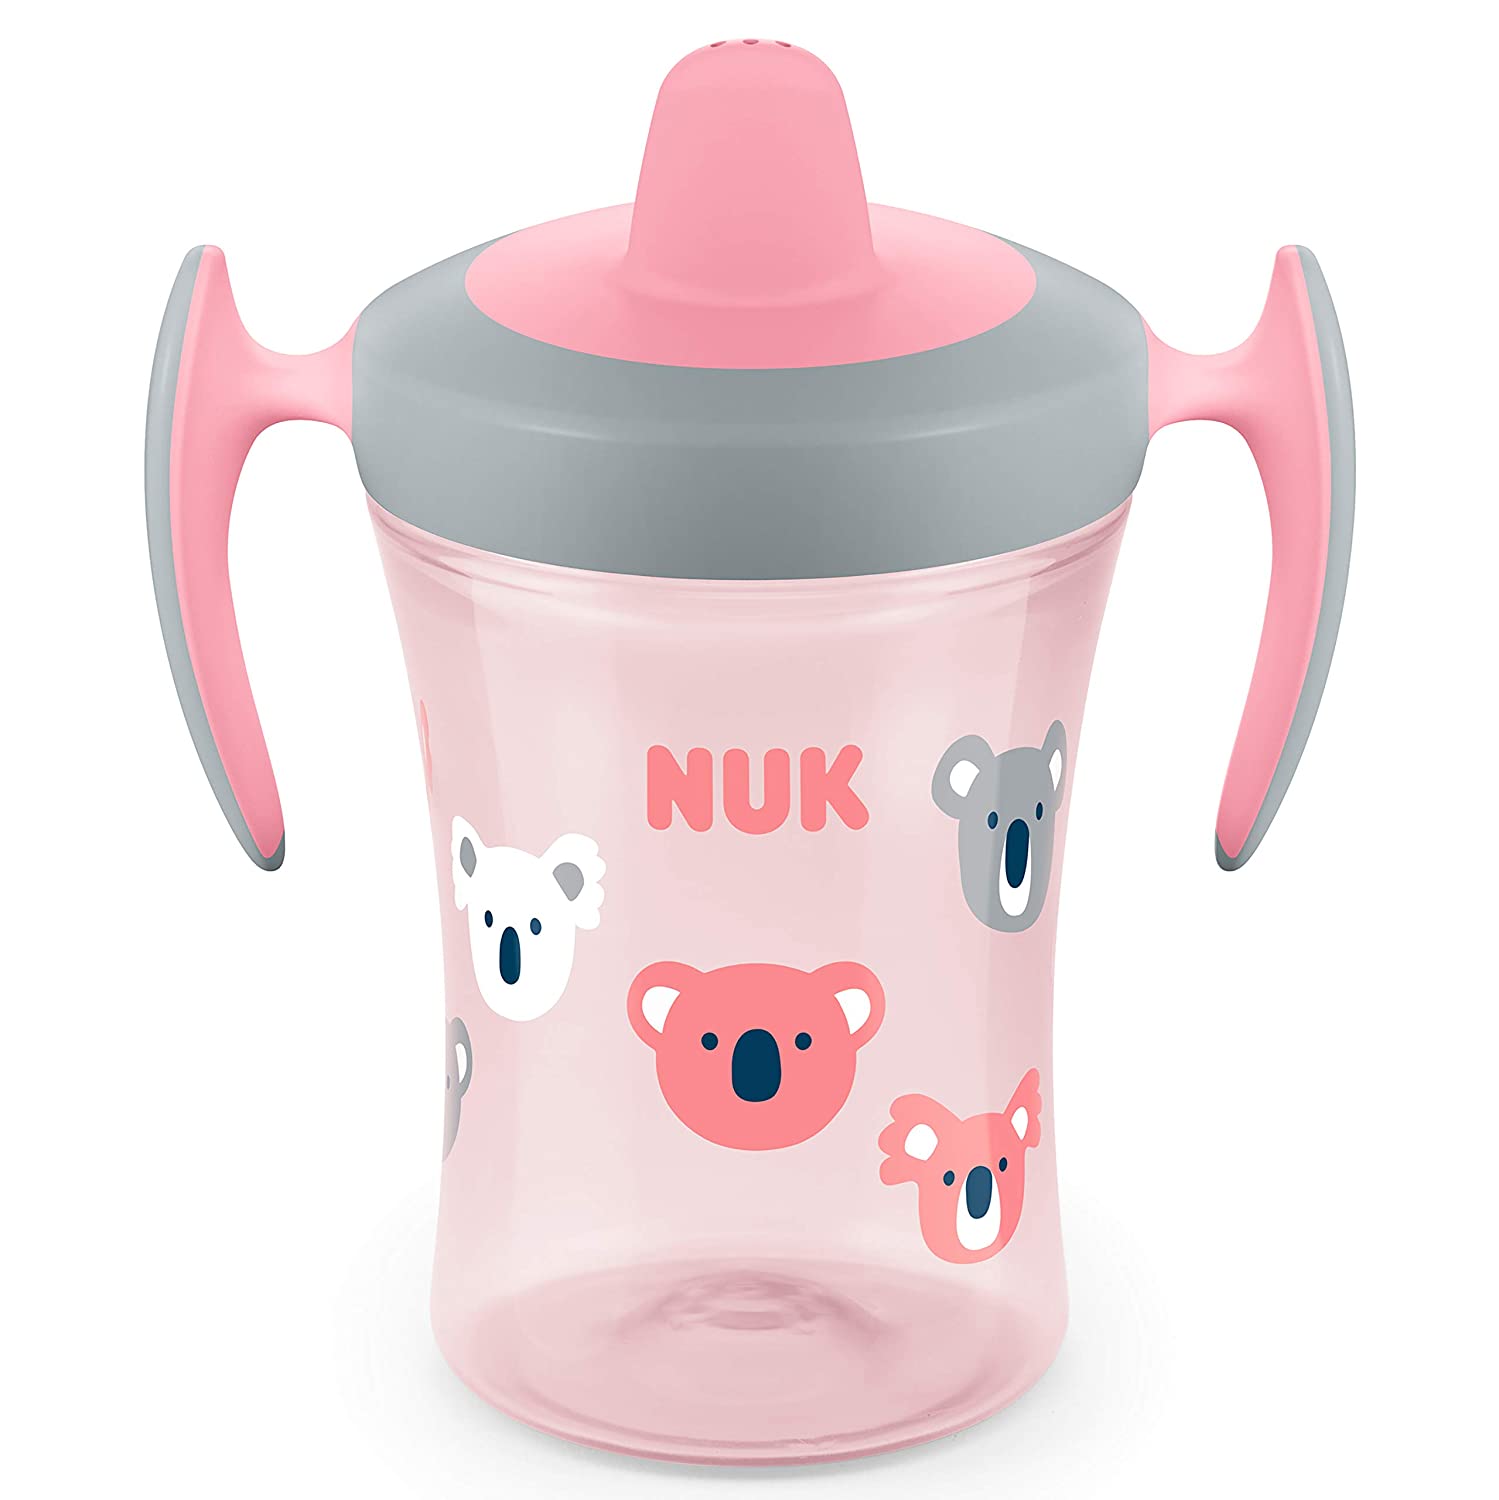 NUK Trainer Cup drinking cup, soft drinking spout, leak-proof, 6+ months, BPA-free, 230ml, assorted colors